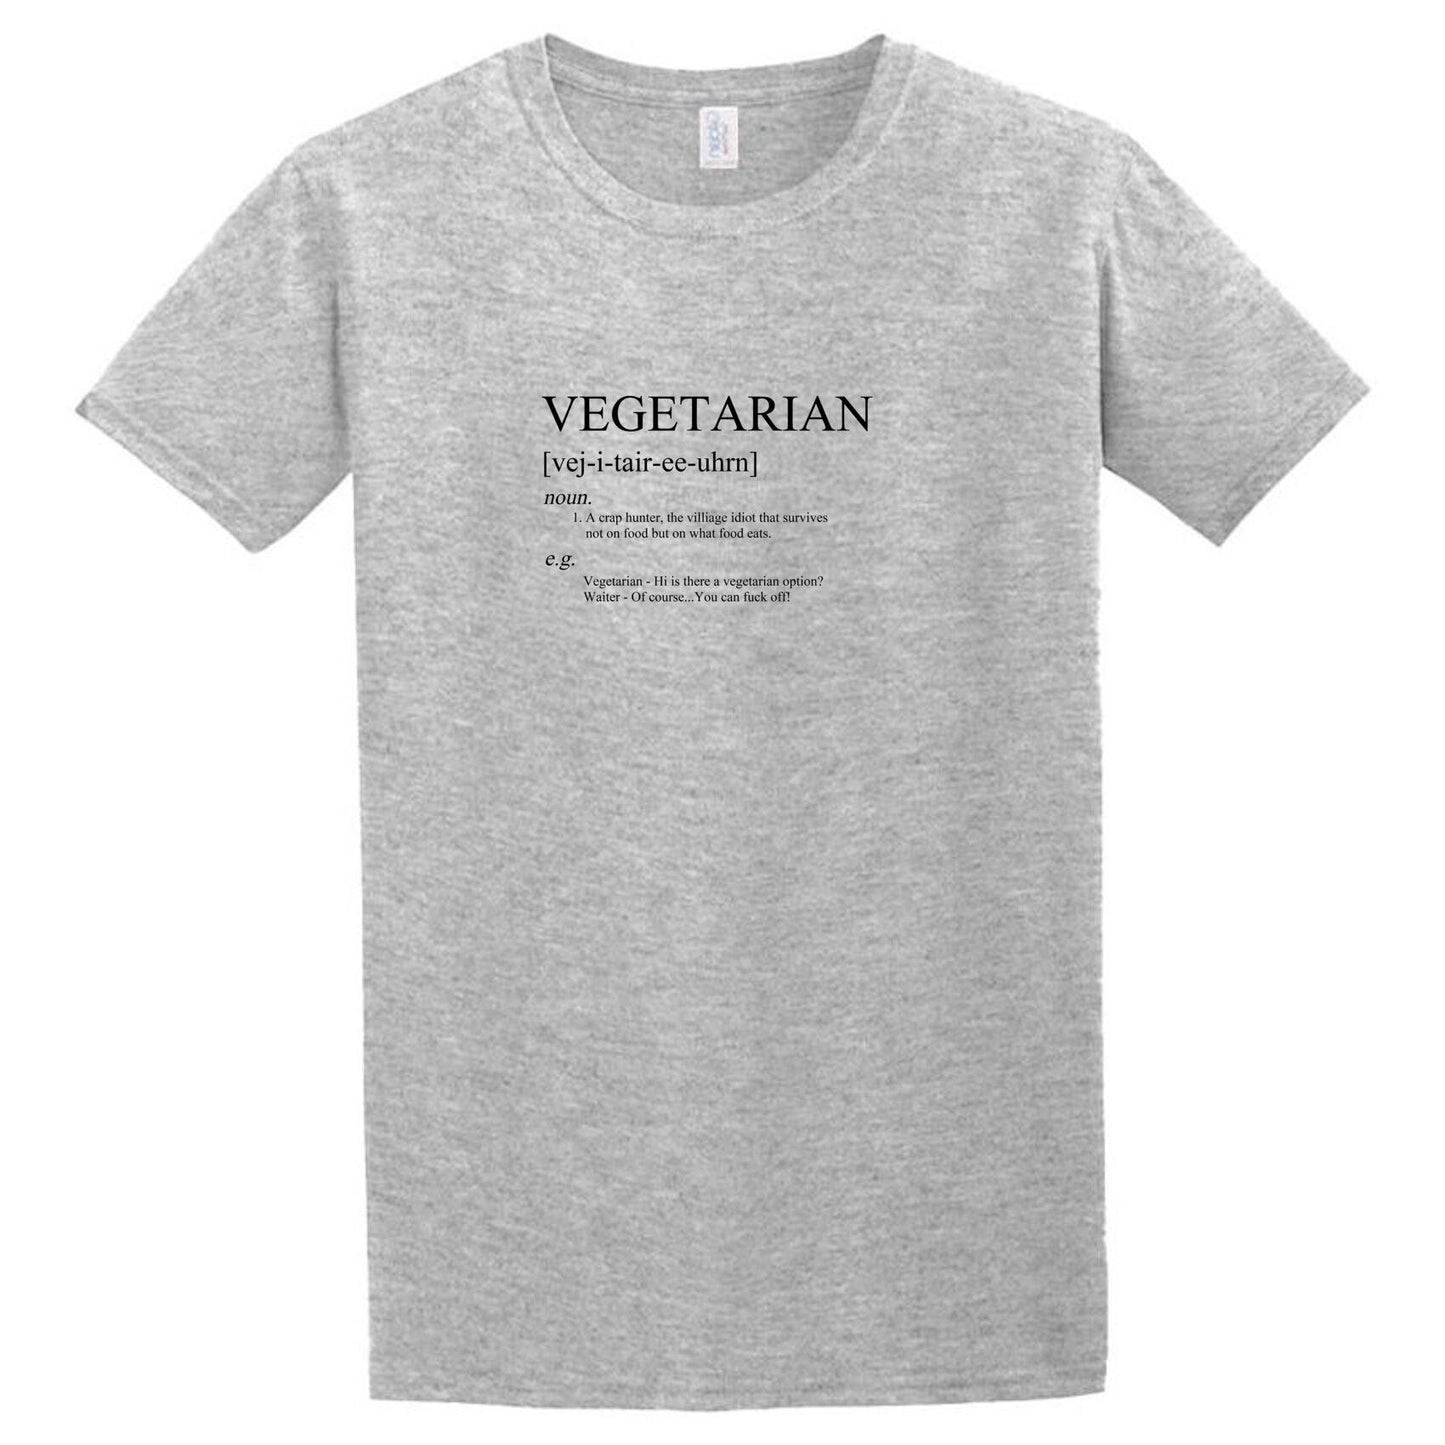 A grey Vegetarian T-Shirt that says vegetarian, made by Twisted Gifts.